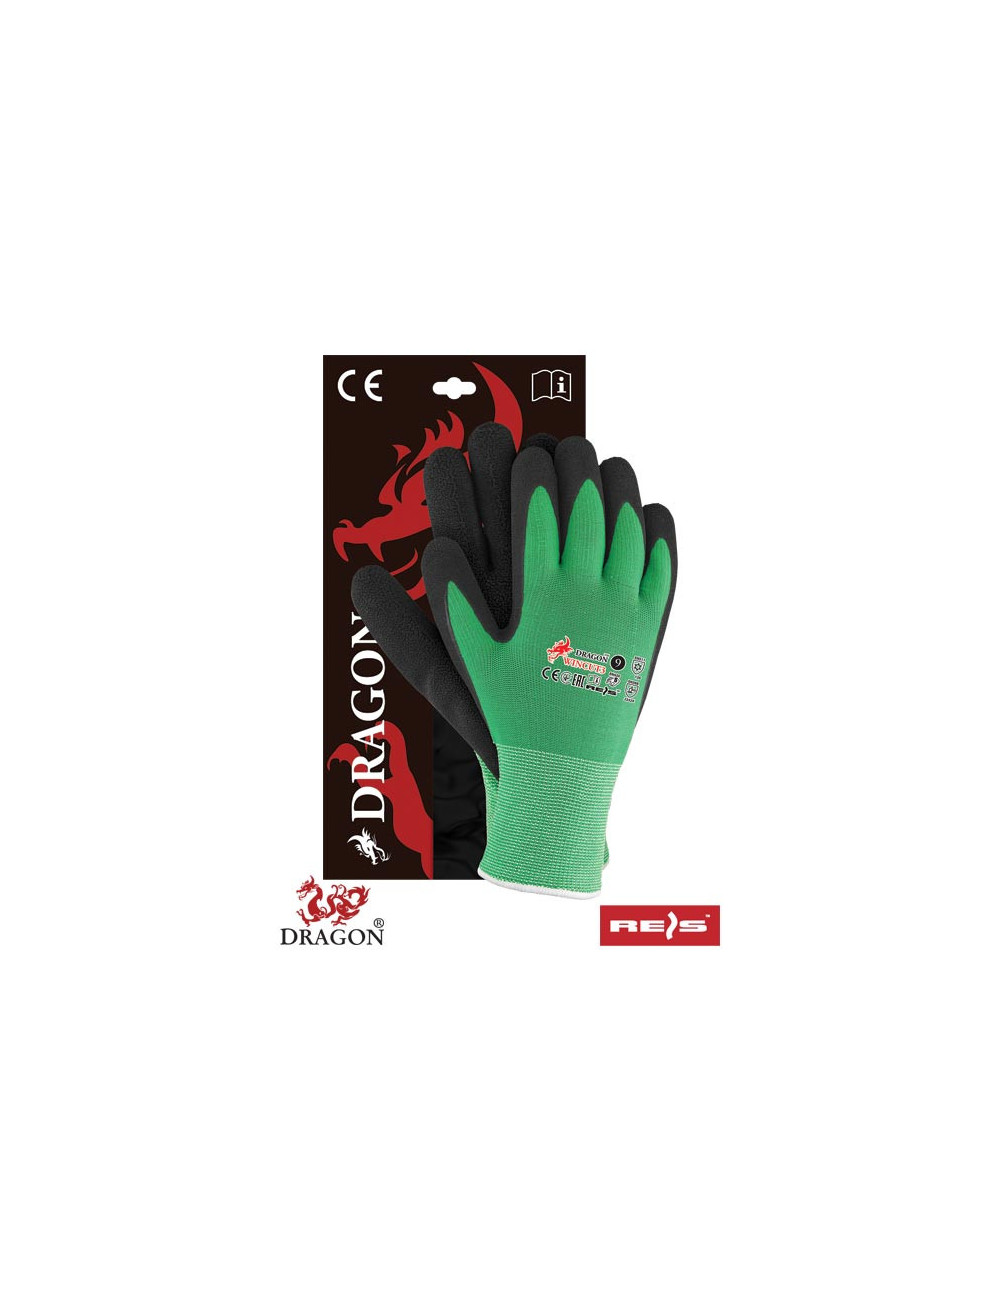 Protective gloves wincut3 zb green-black Reis